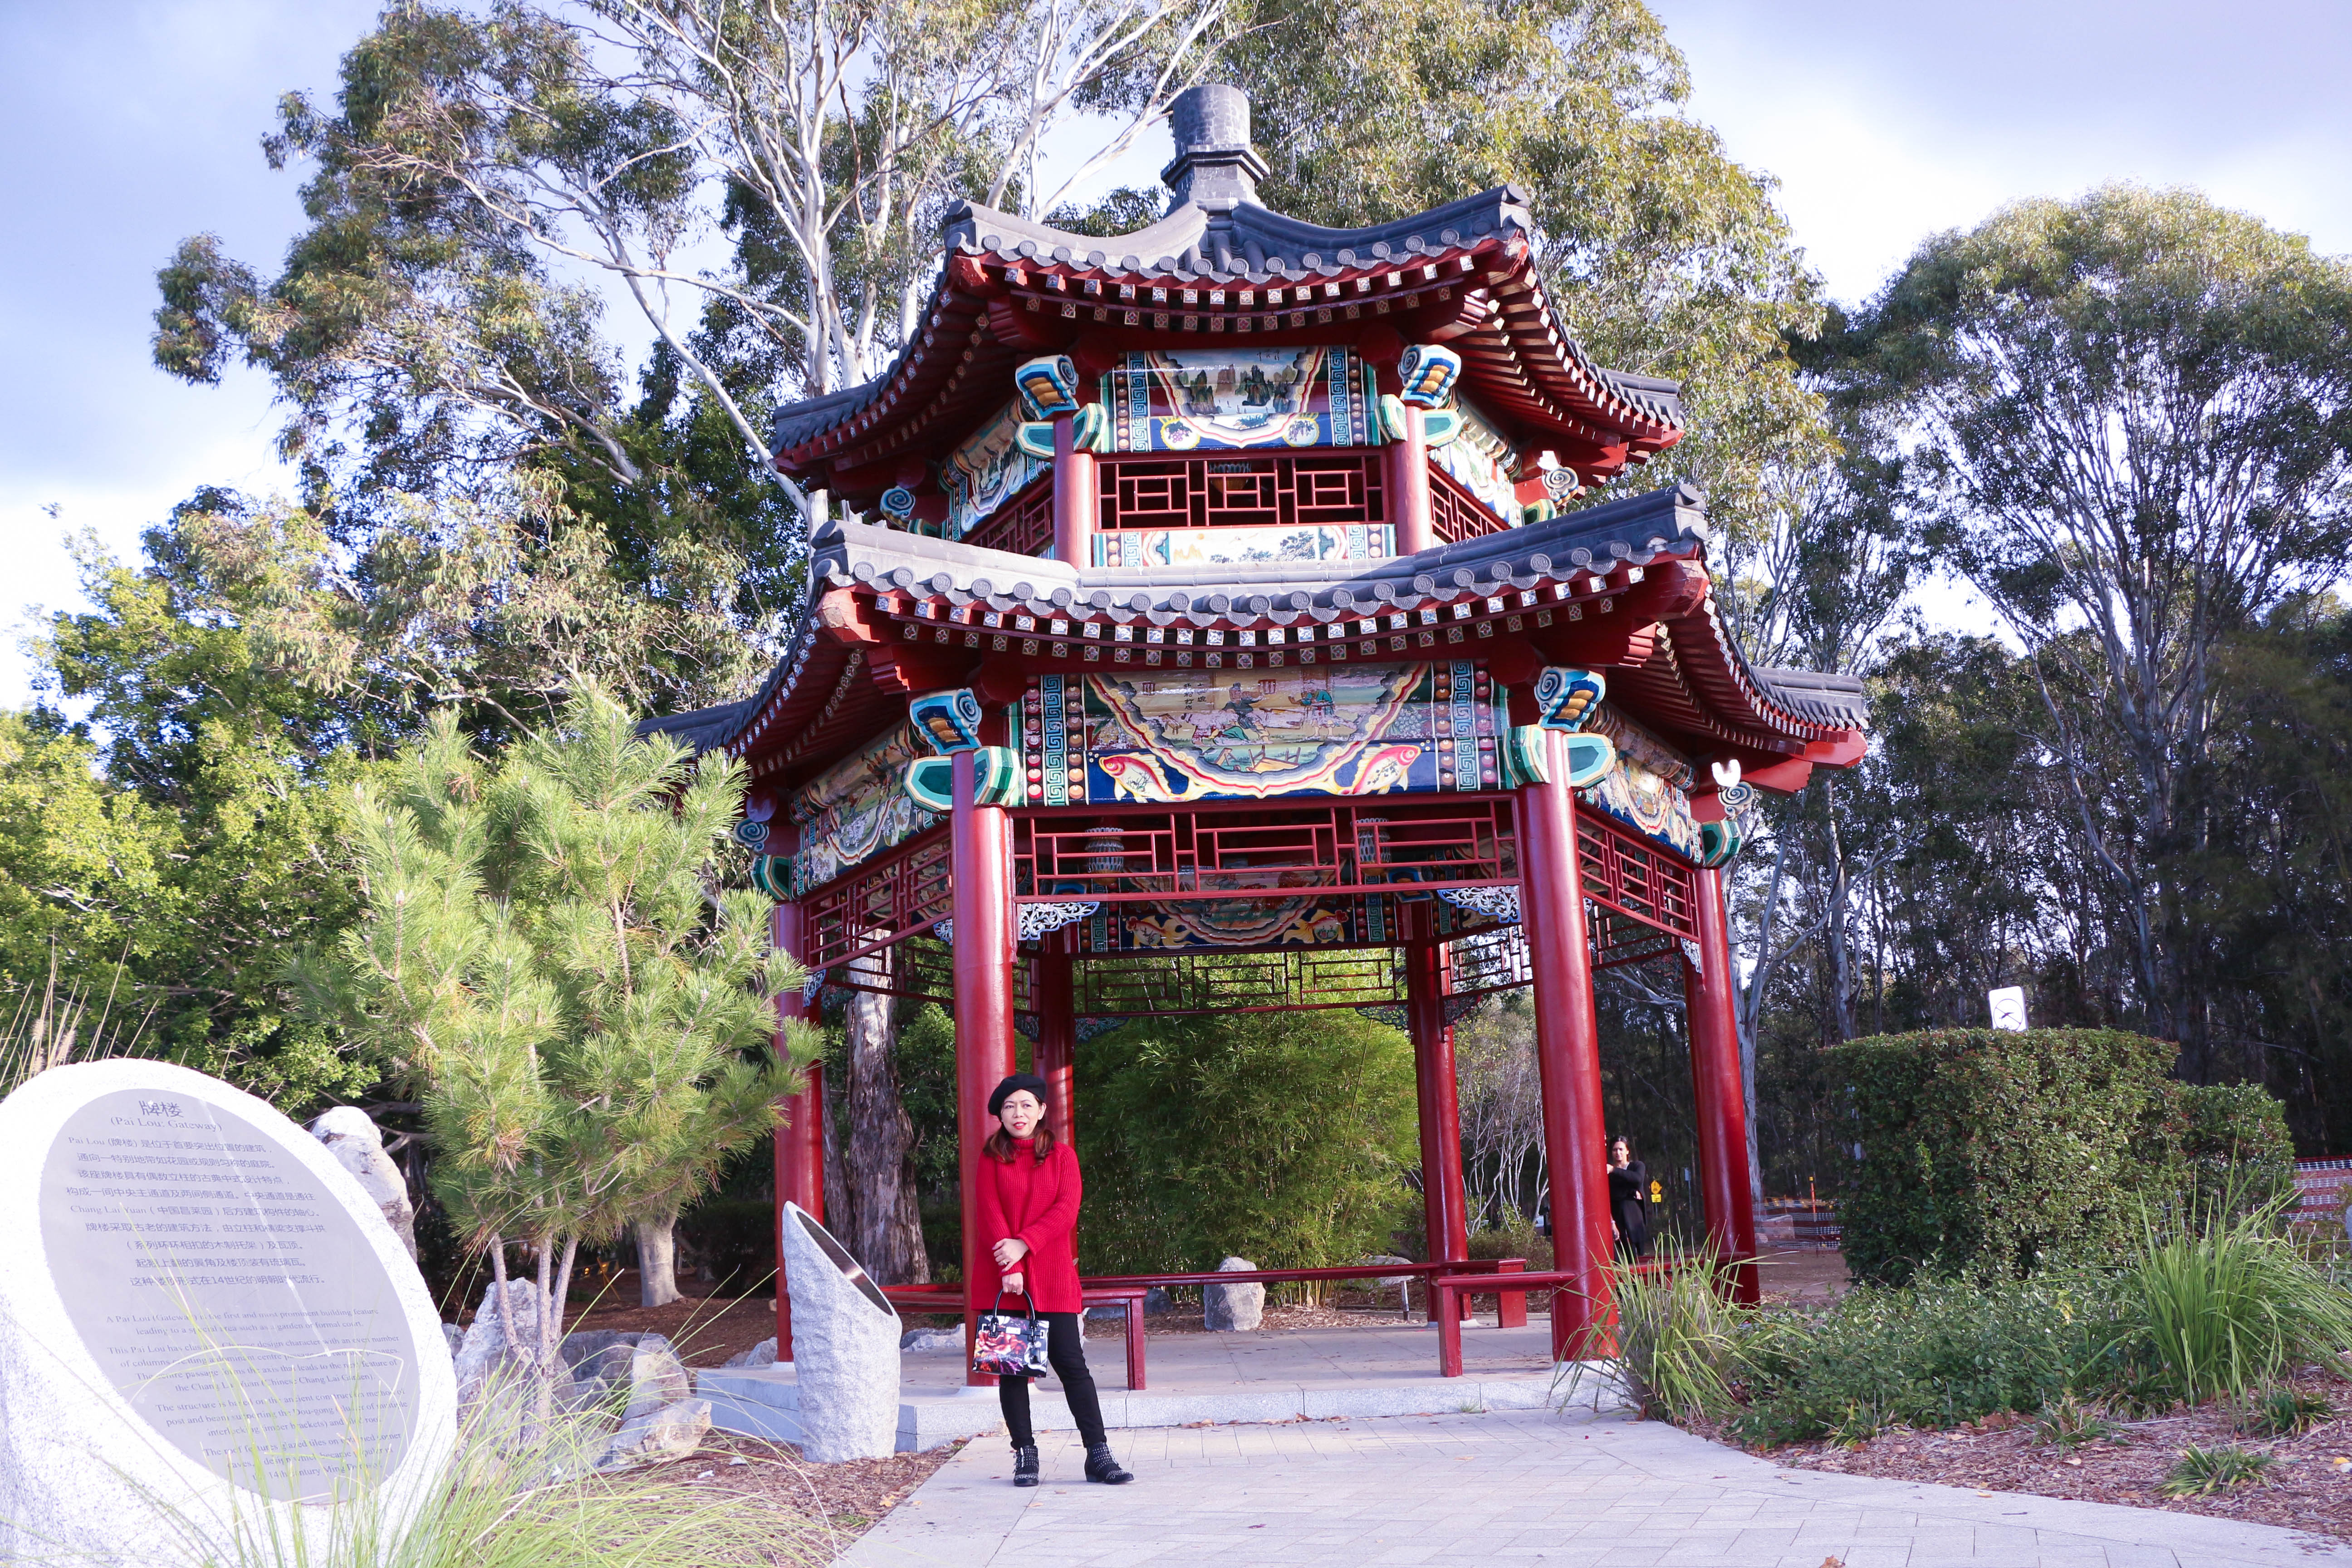 What to wear in Chinese Garden